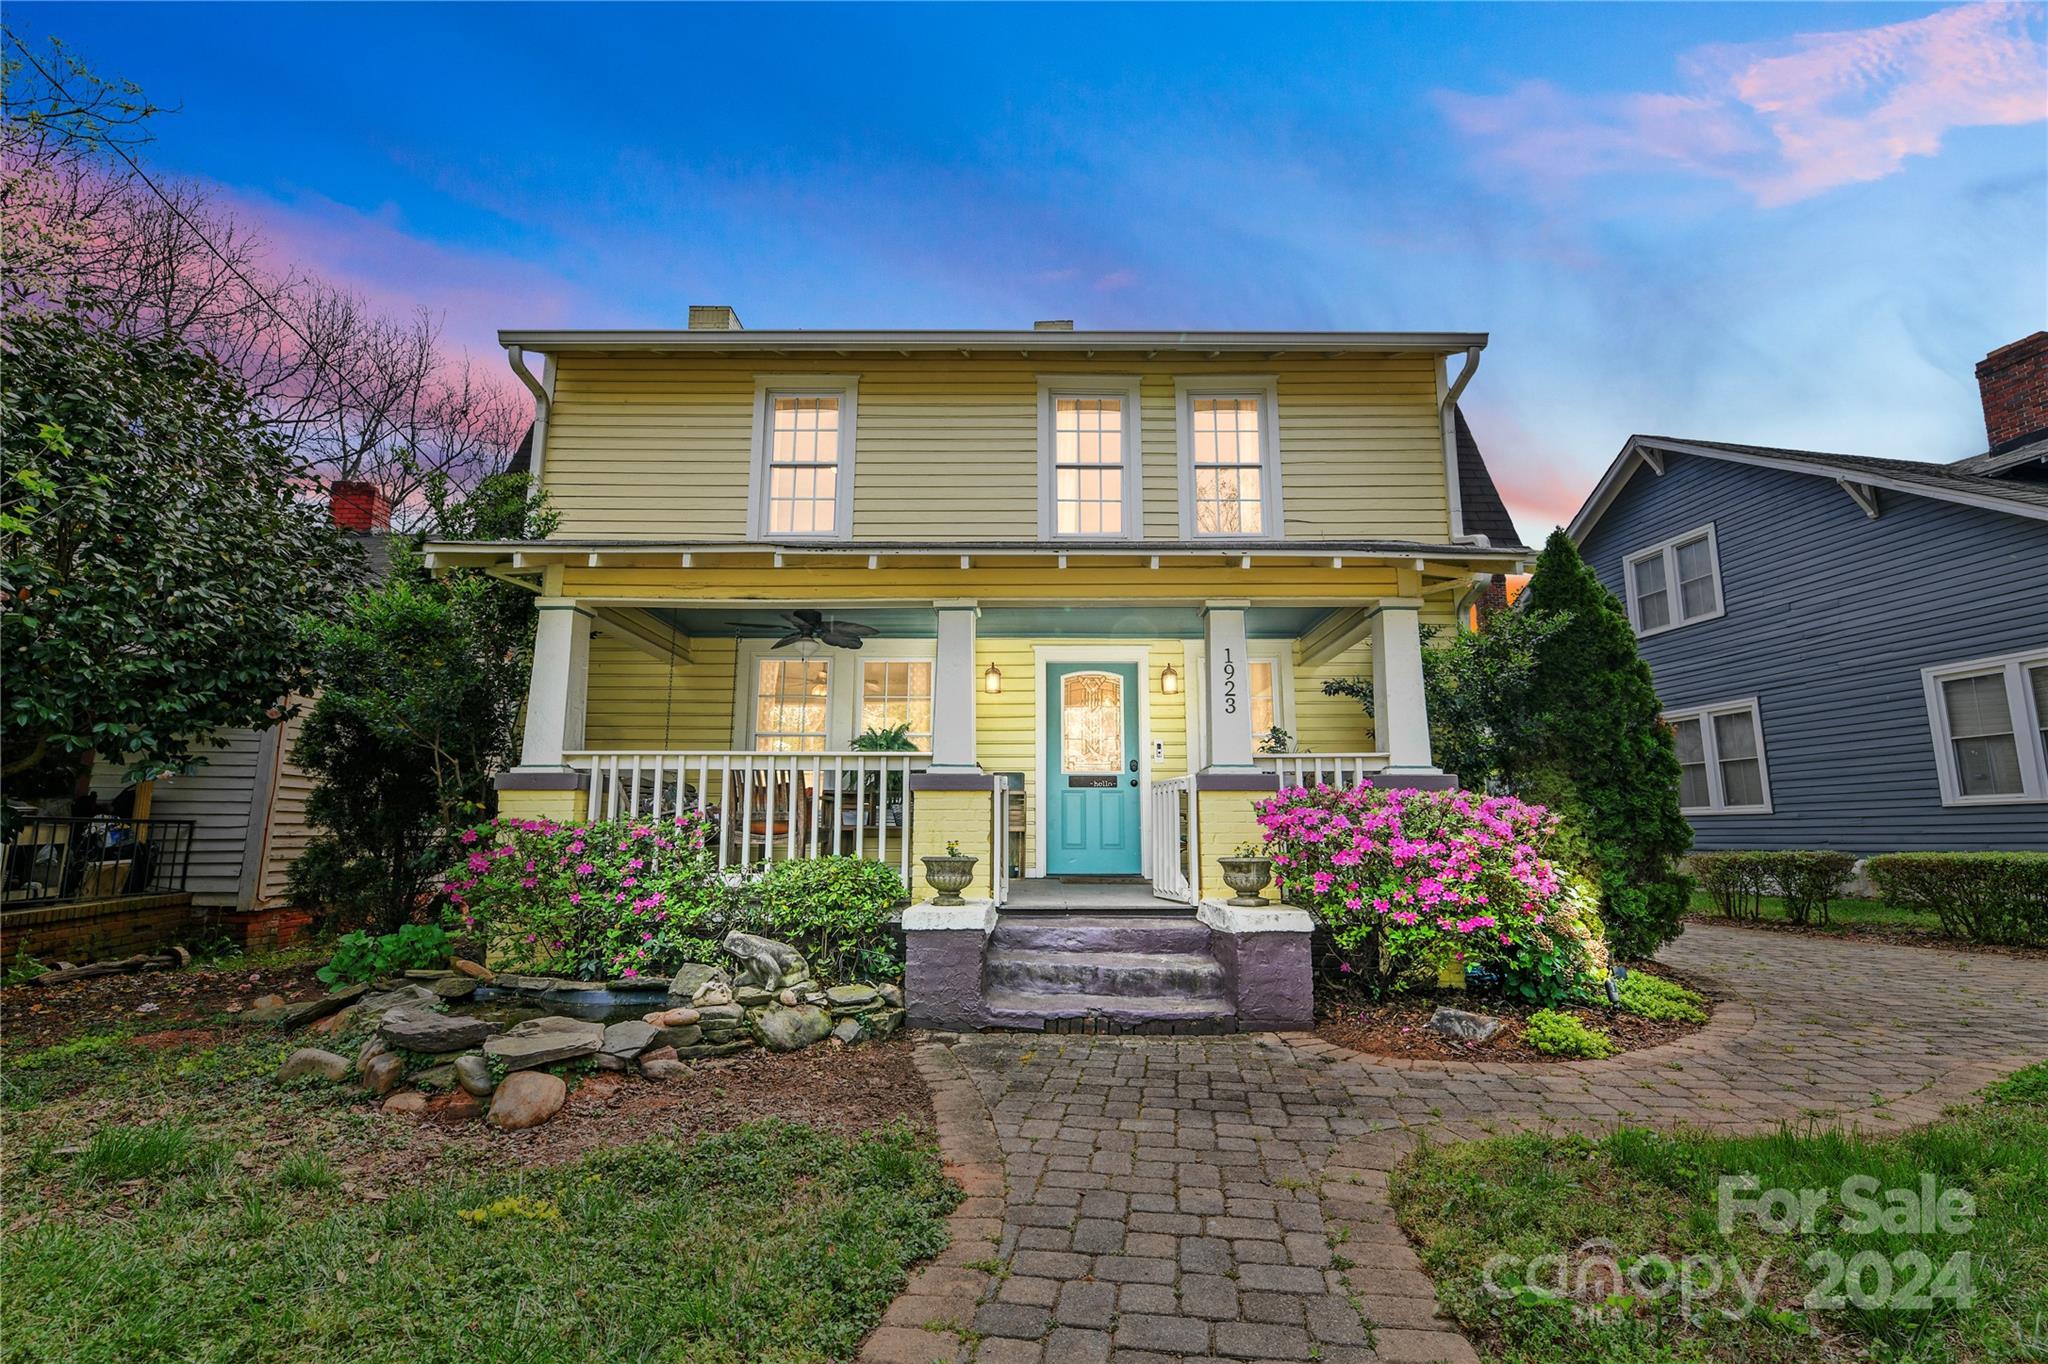 Photo one of 1923 Oaklawn Ave Charlotte NC 28216 | MLS 4125365